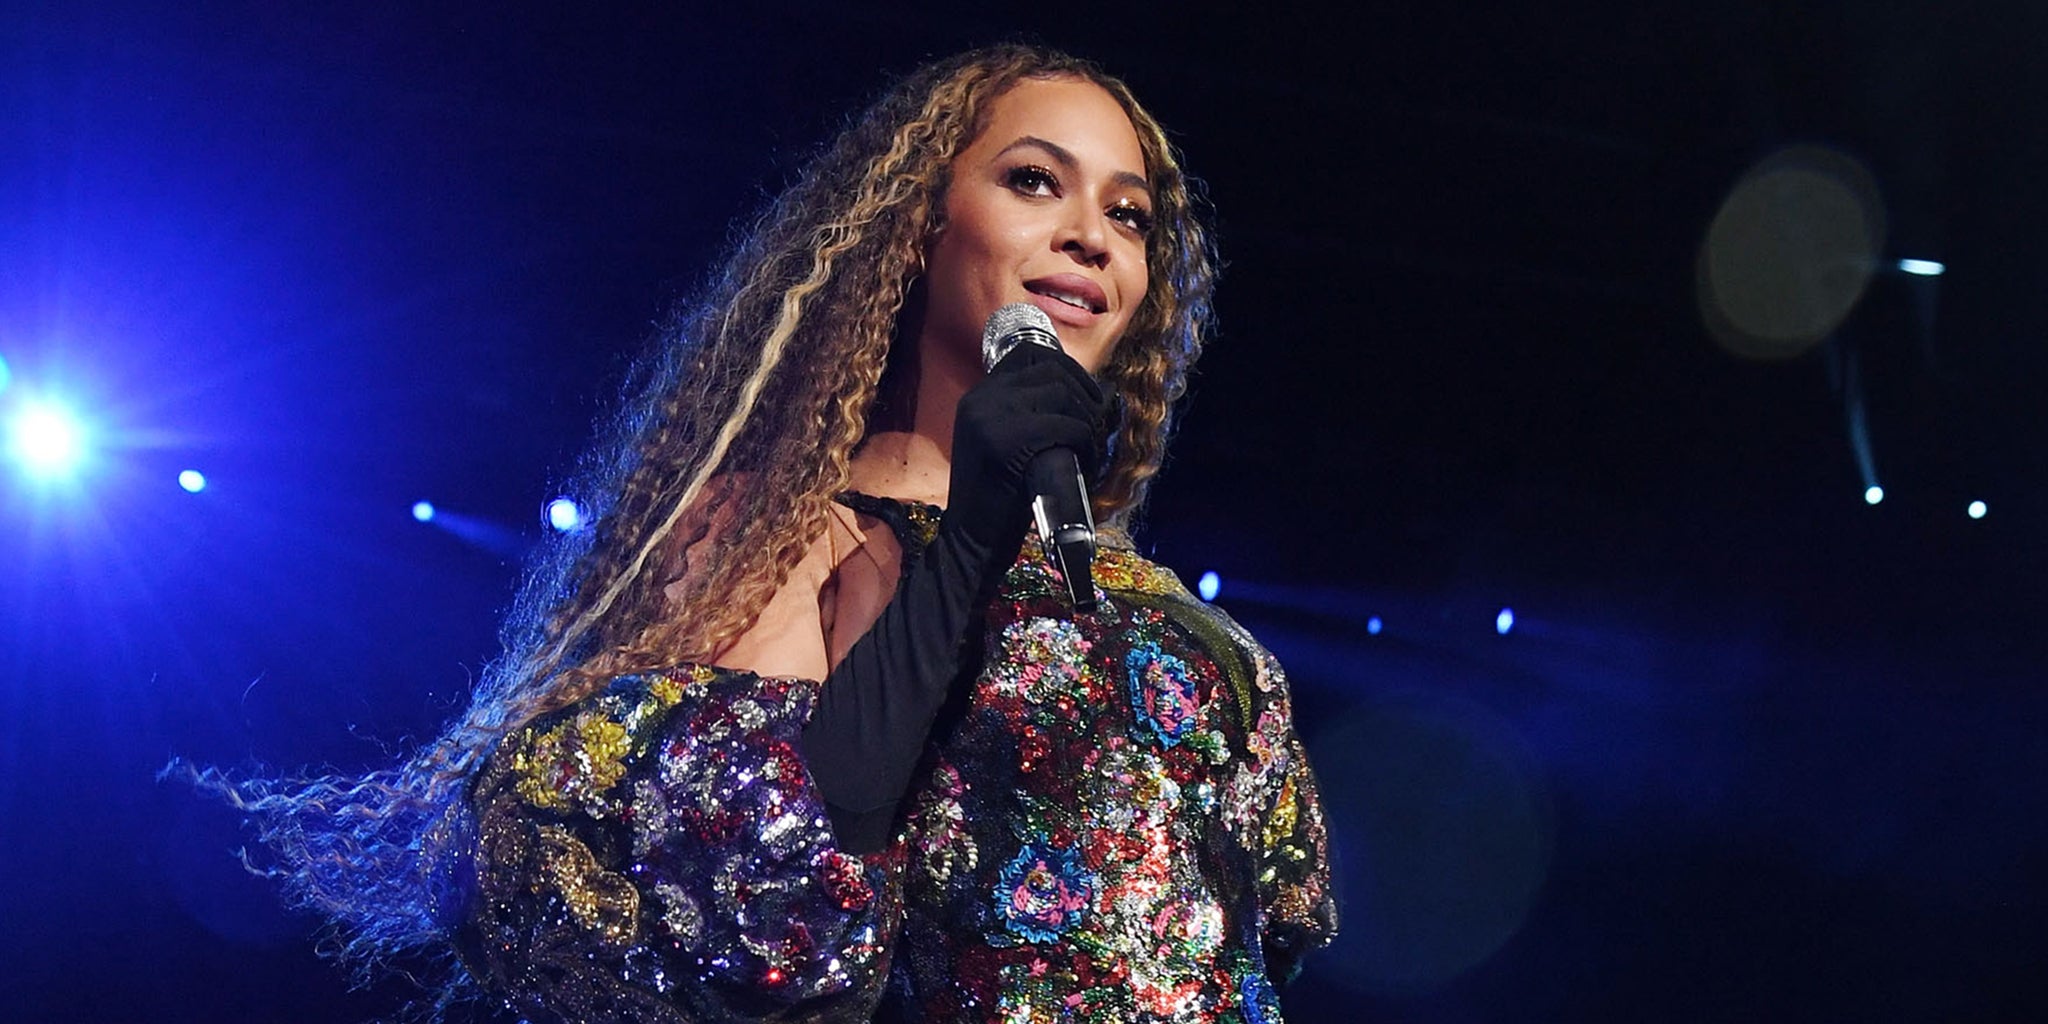 Why No One, Not Even Beyoncé, Can Avoid Acne